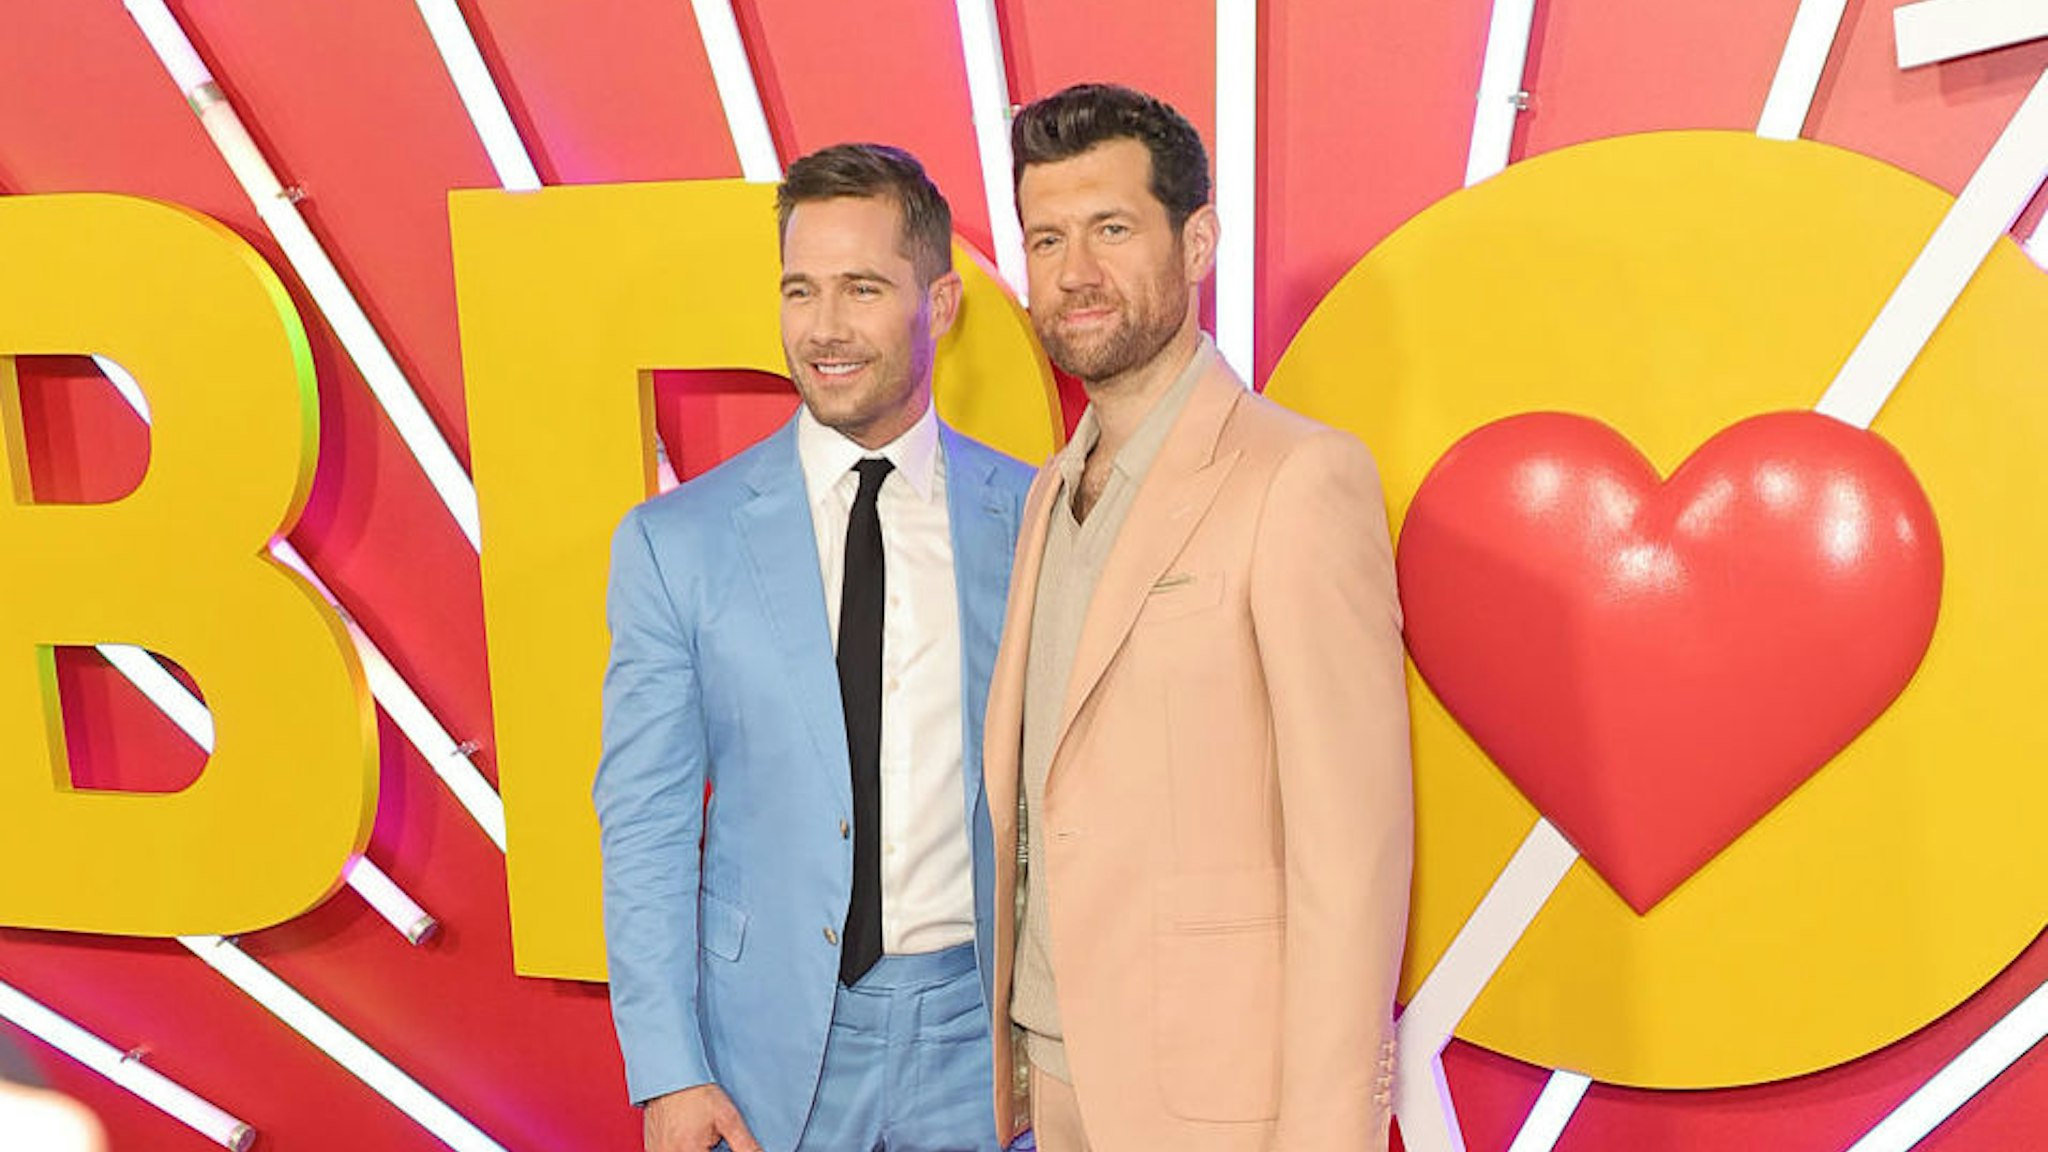 (L-R) Luke Macfarlane and Billy Eichner attend the Los Angeles Premiere of Universal Pictures' "Bros" at Regal LA Live on September 28, 2022 in Los Angeles, California.